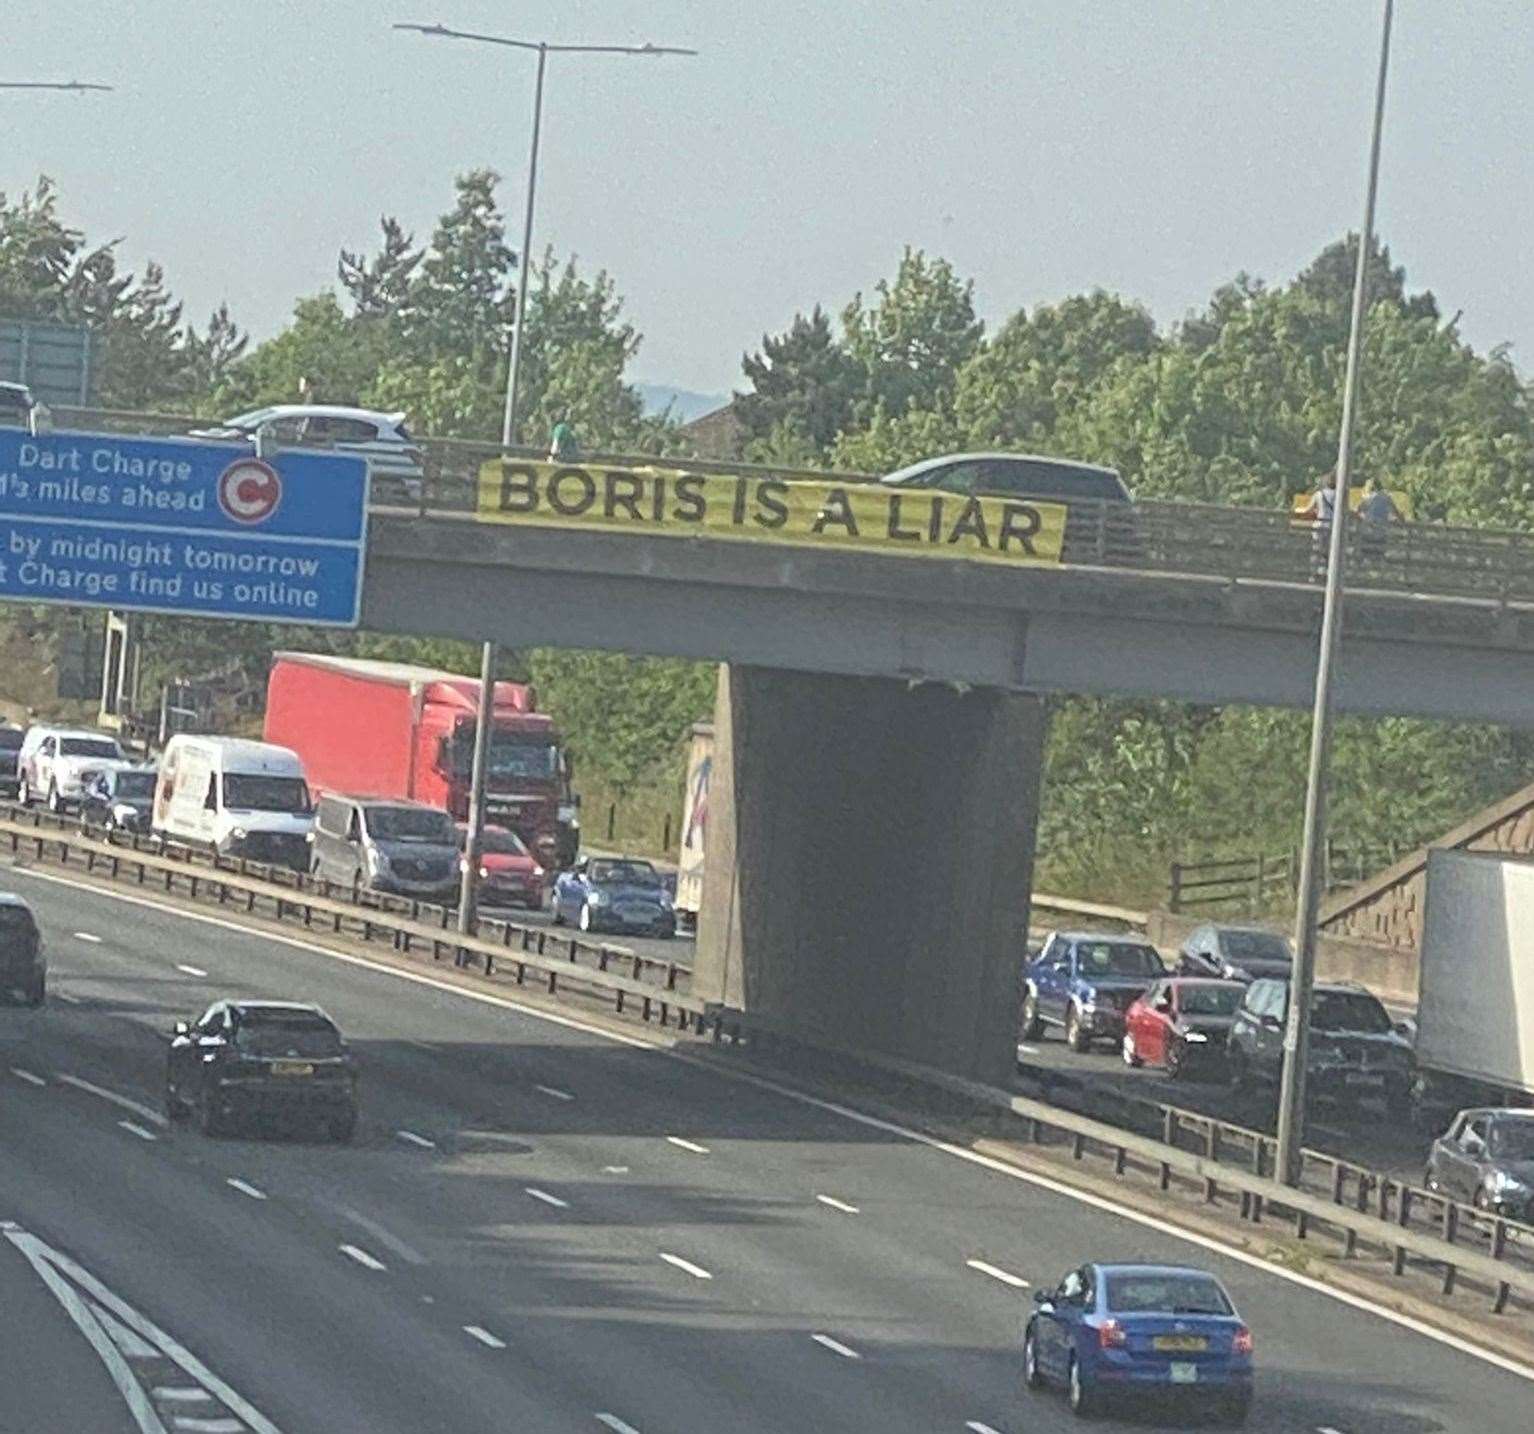 A banner which read Boris is a liar was spotted on an M25 flyover on the Dartford Tunnel approach. Photo: Darren Povey